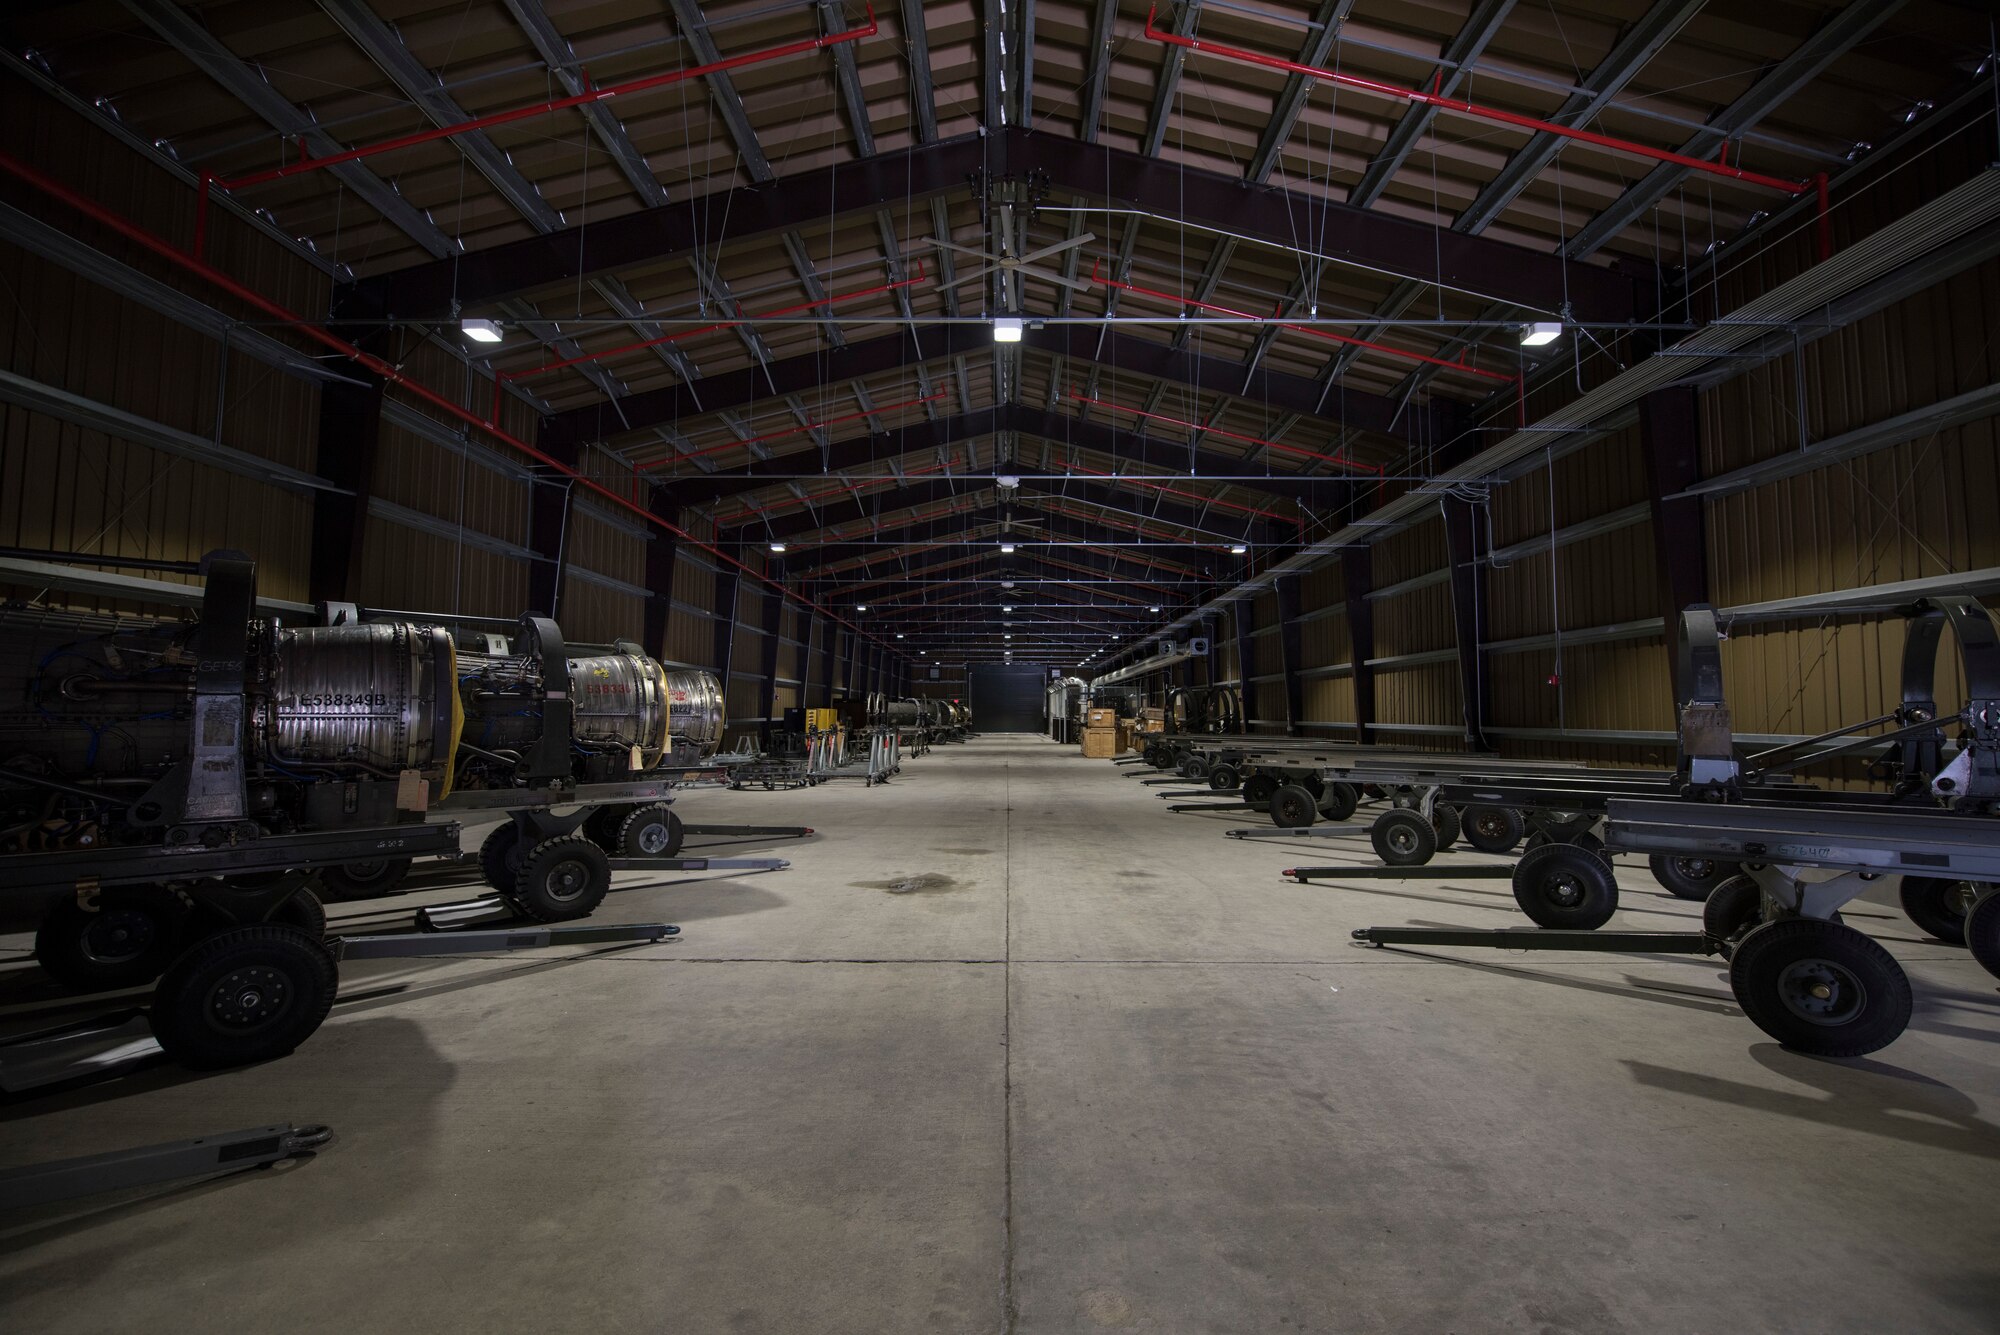 The 35th Maintenance Squadron propulsion flight centralized repair storage facility stores various equipment at Misawa Air Base, Japan, Feb. 12, 2019. The seemingly brand new building is constructed out of four unused corrugated metal buildings, which aided in cost savings, time and resources. (U.S. Air Force photo by Airman 1st Class Collette Brooks)